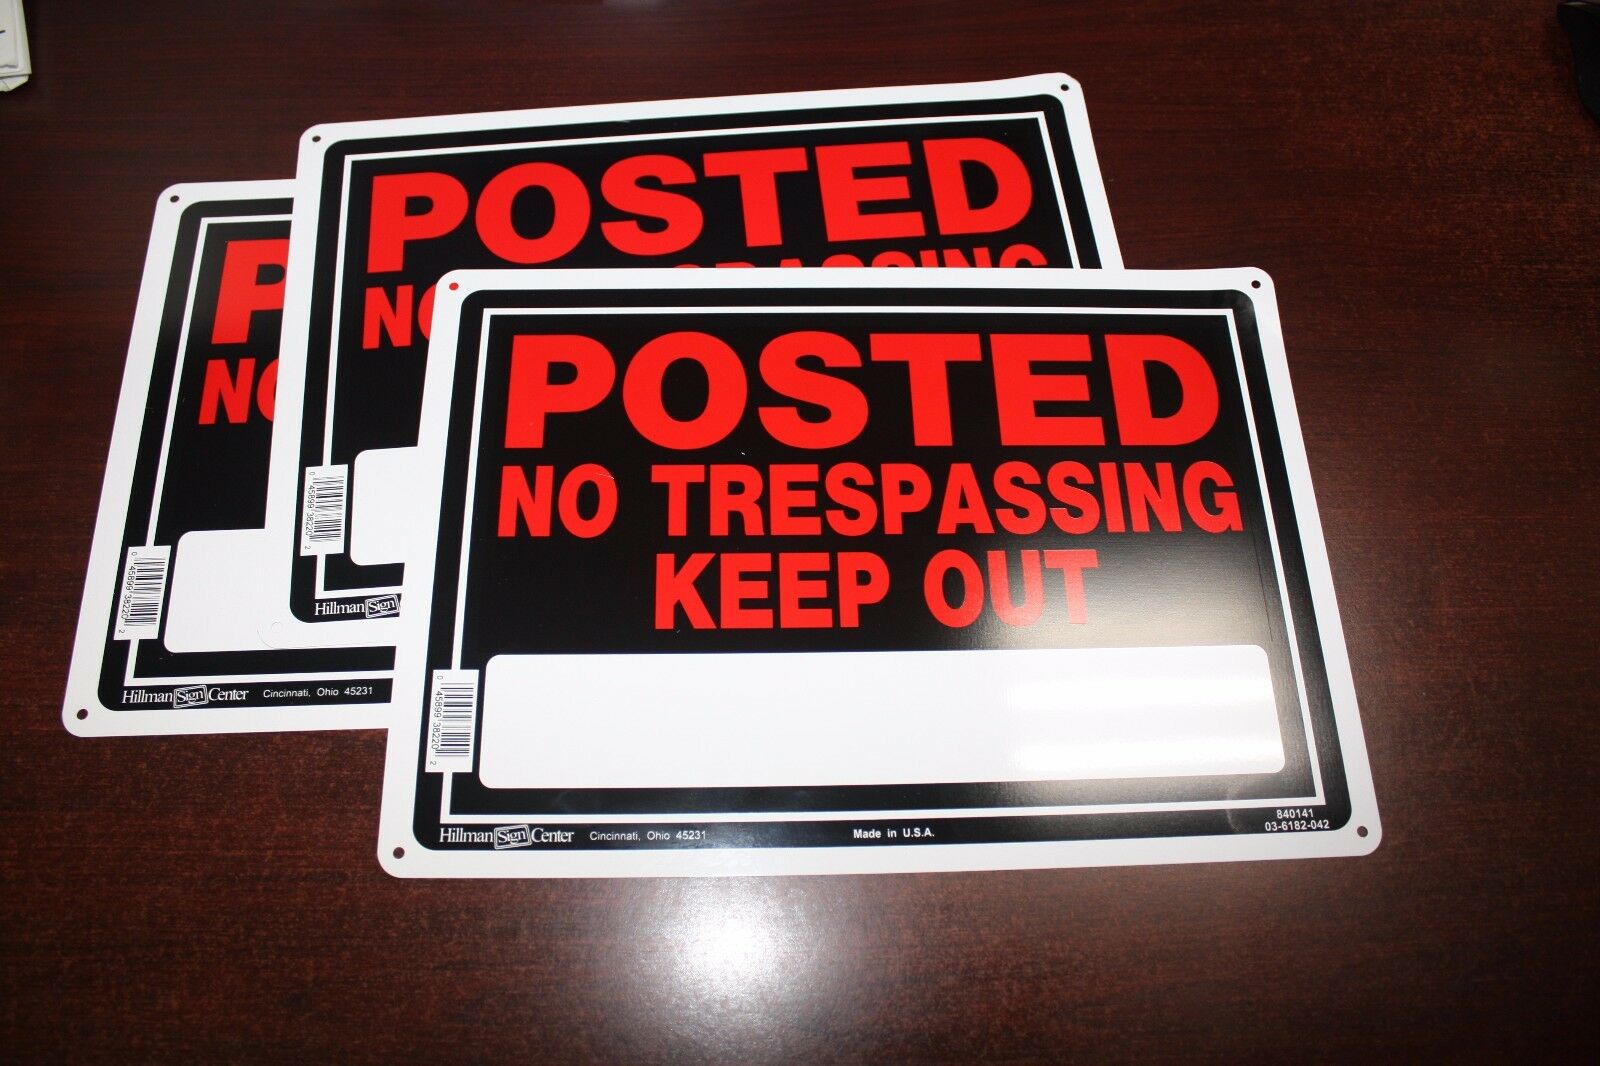 Posted No Trespassing Keep Out - New 3 Set 10" X 14" Aluminum Metal Sign Hillman